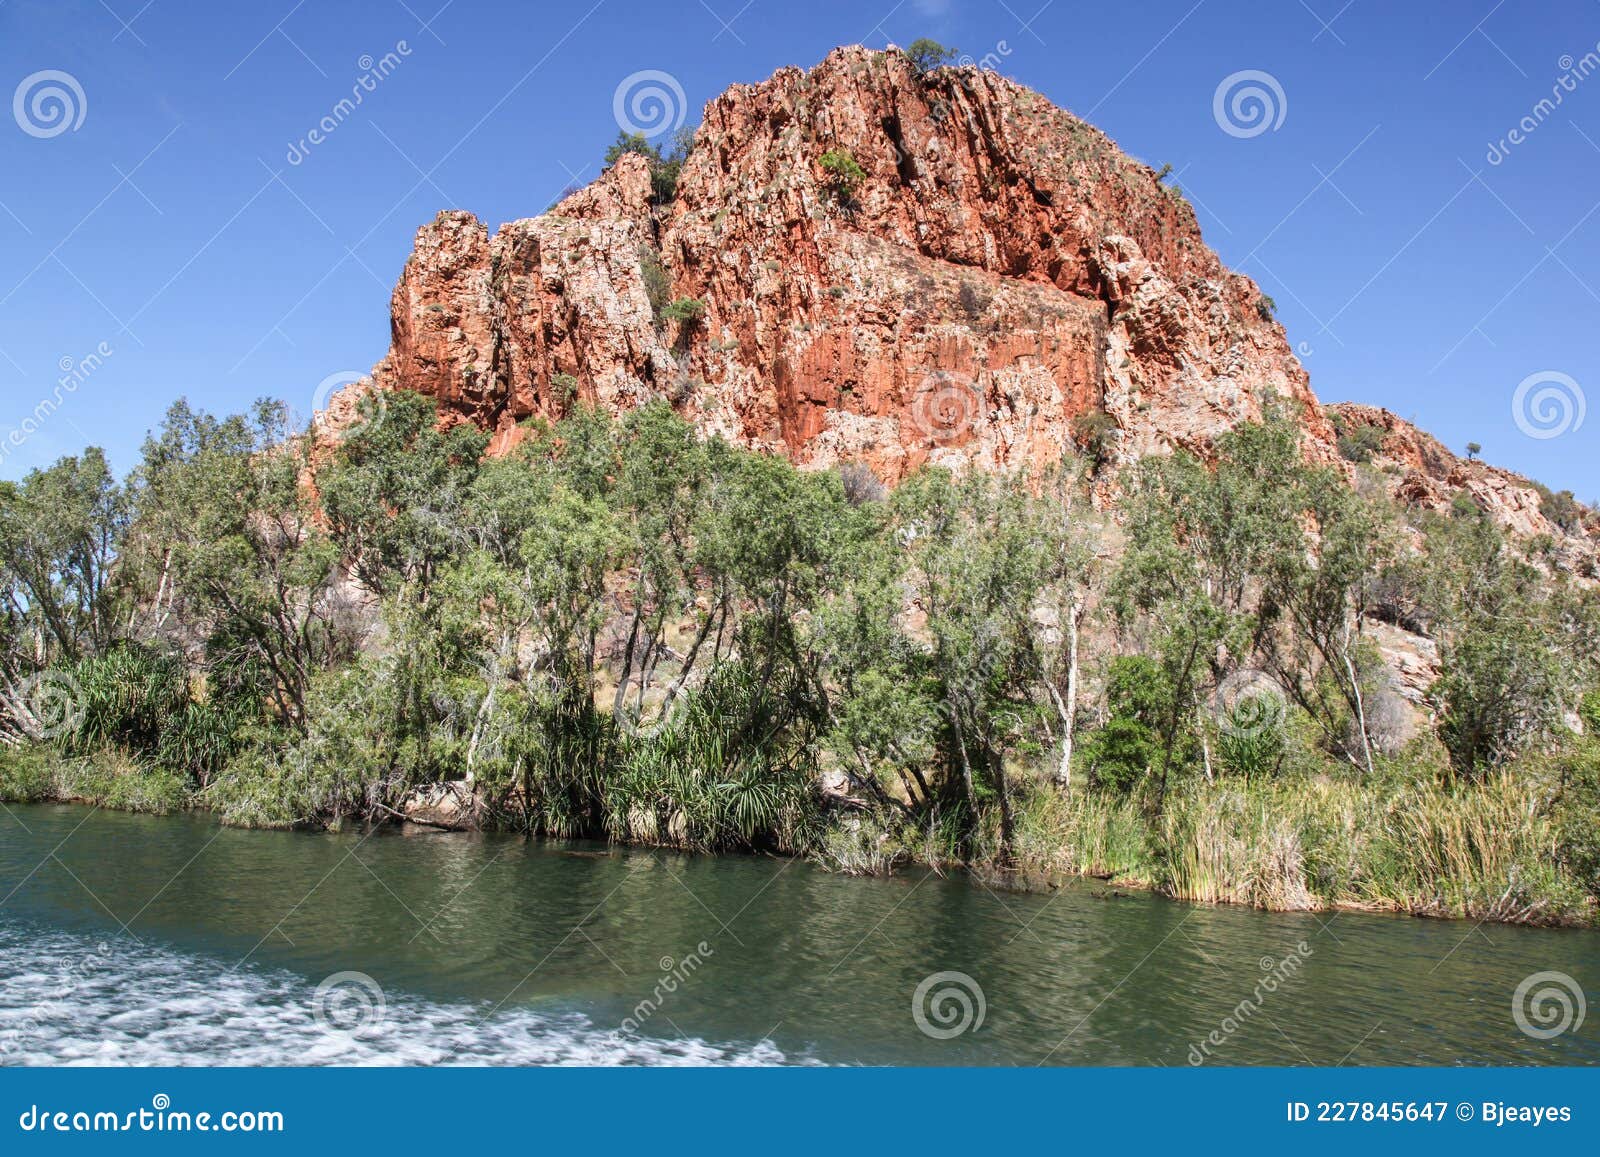 rocky outcrop of the ord river - western australia